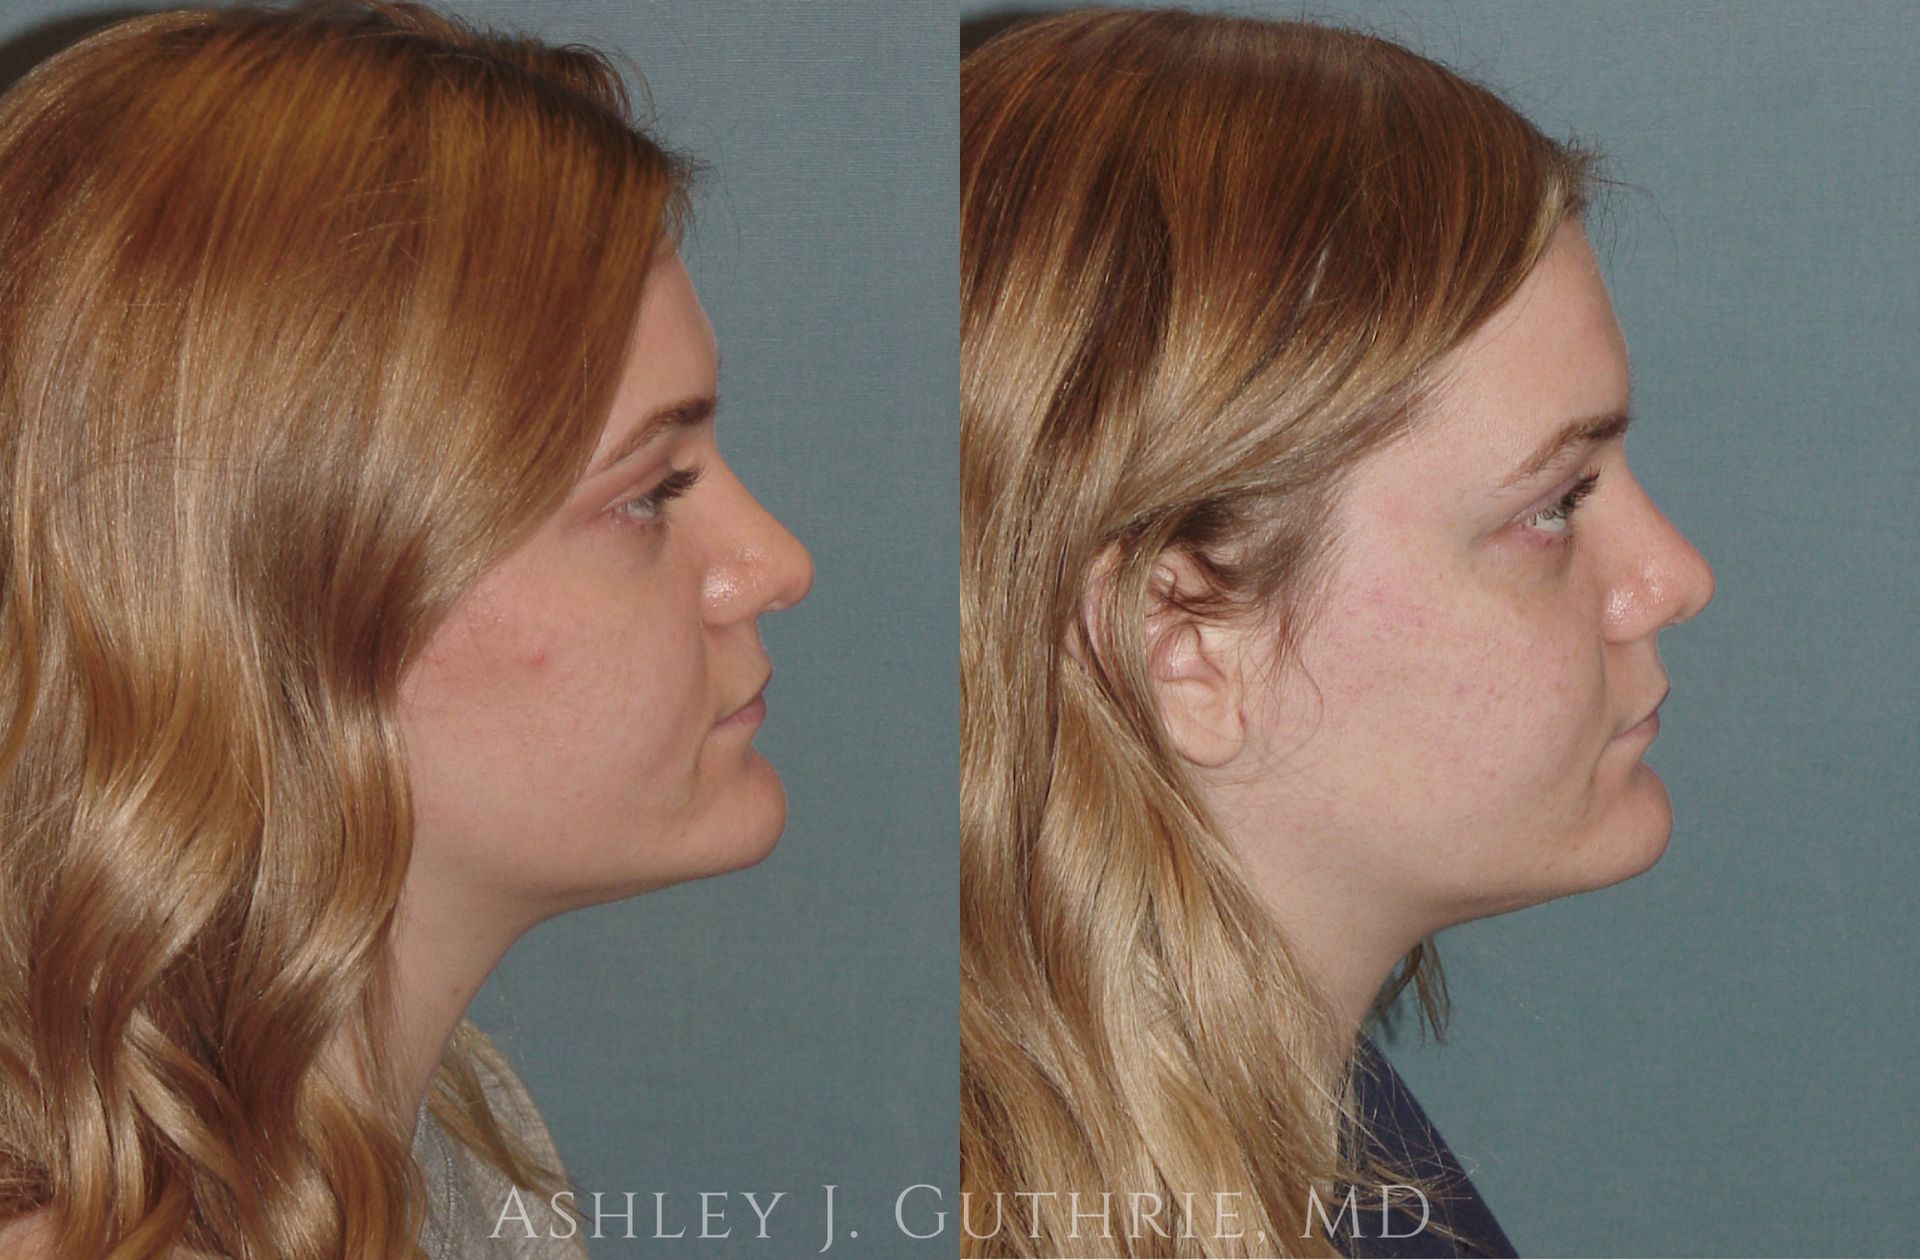 before & after - rhinoplasty